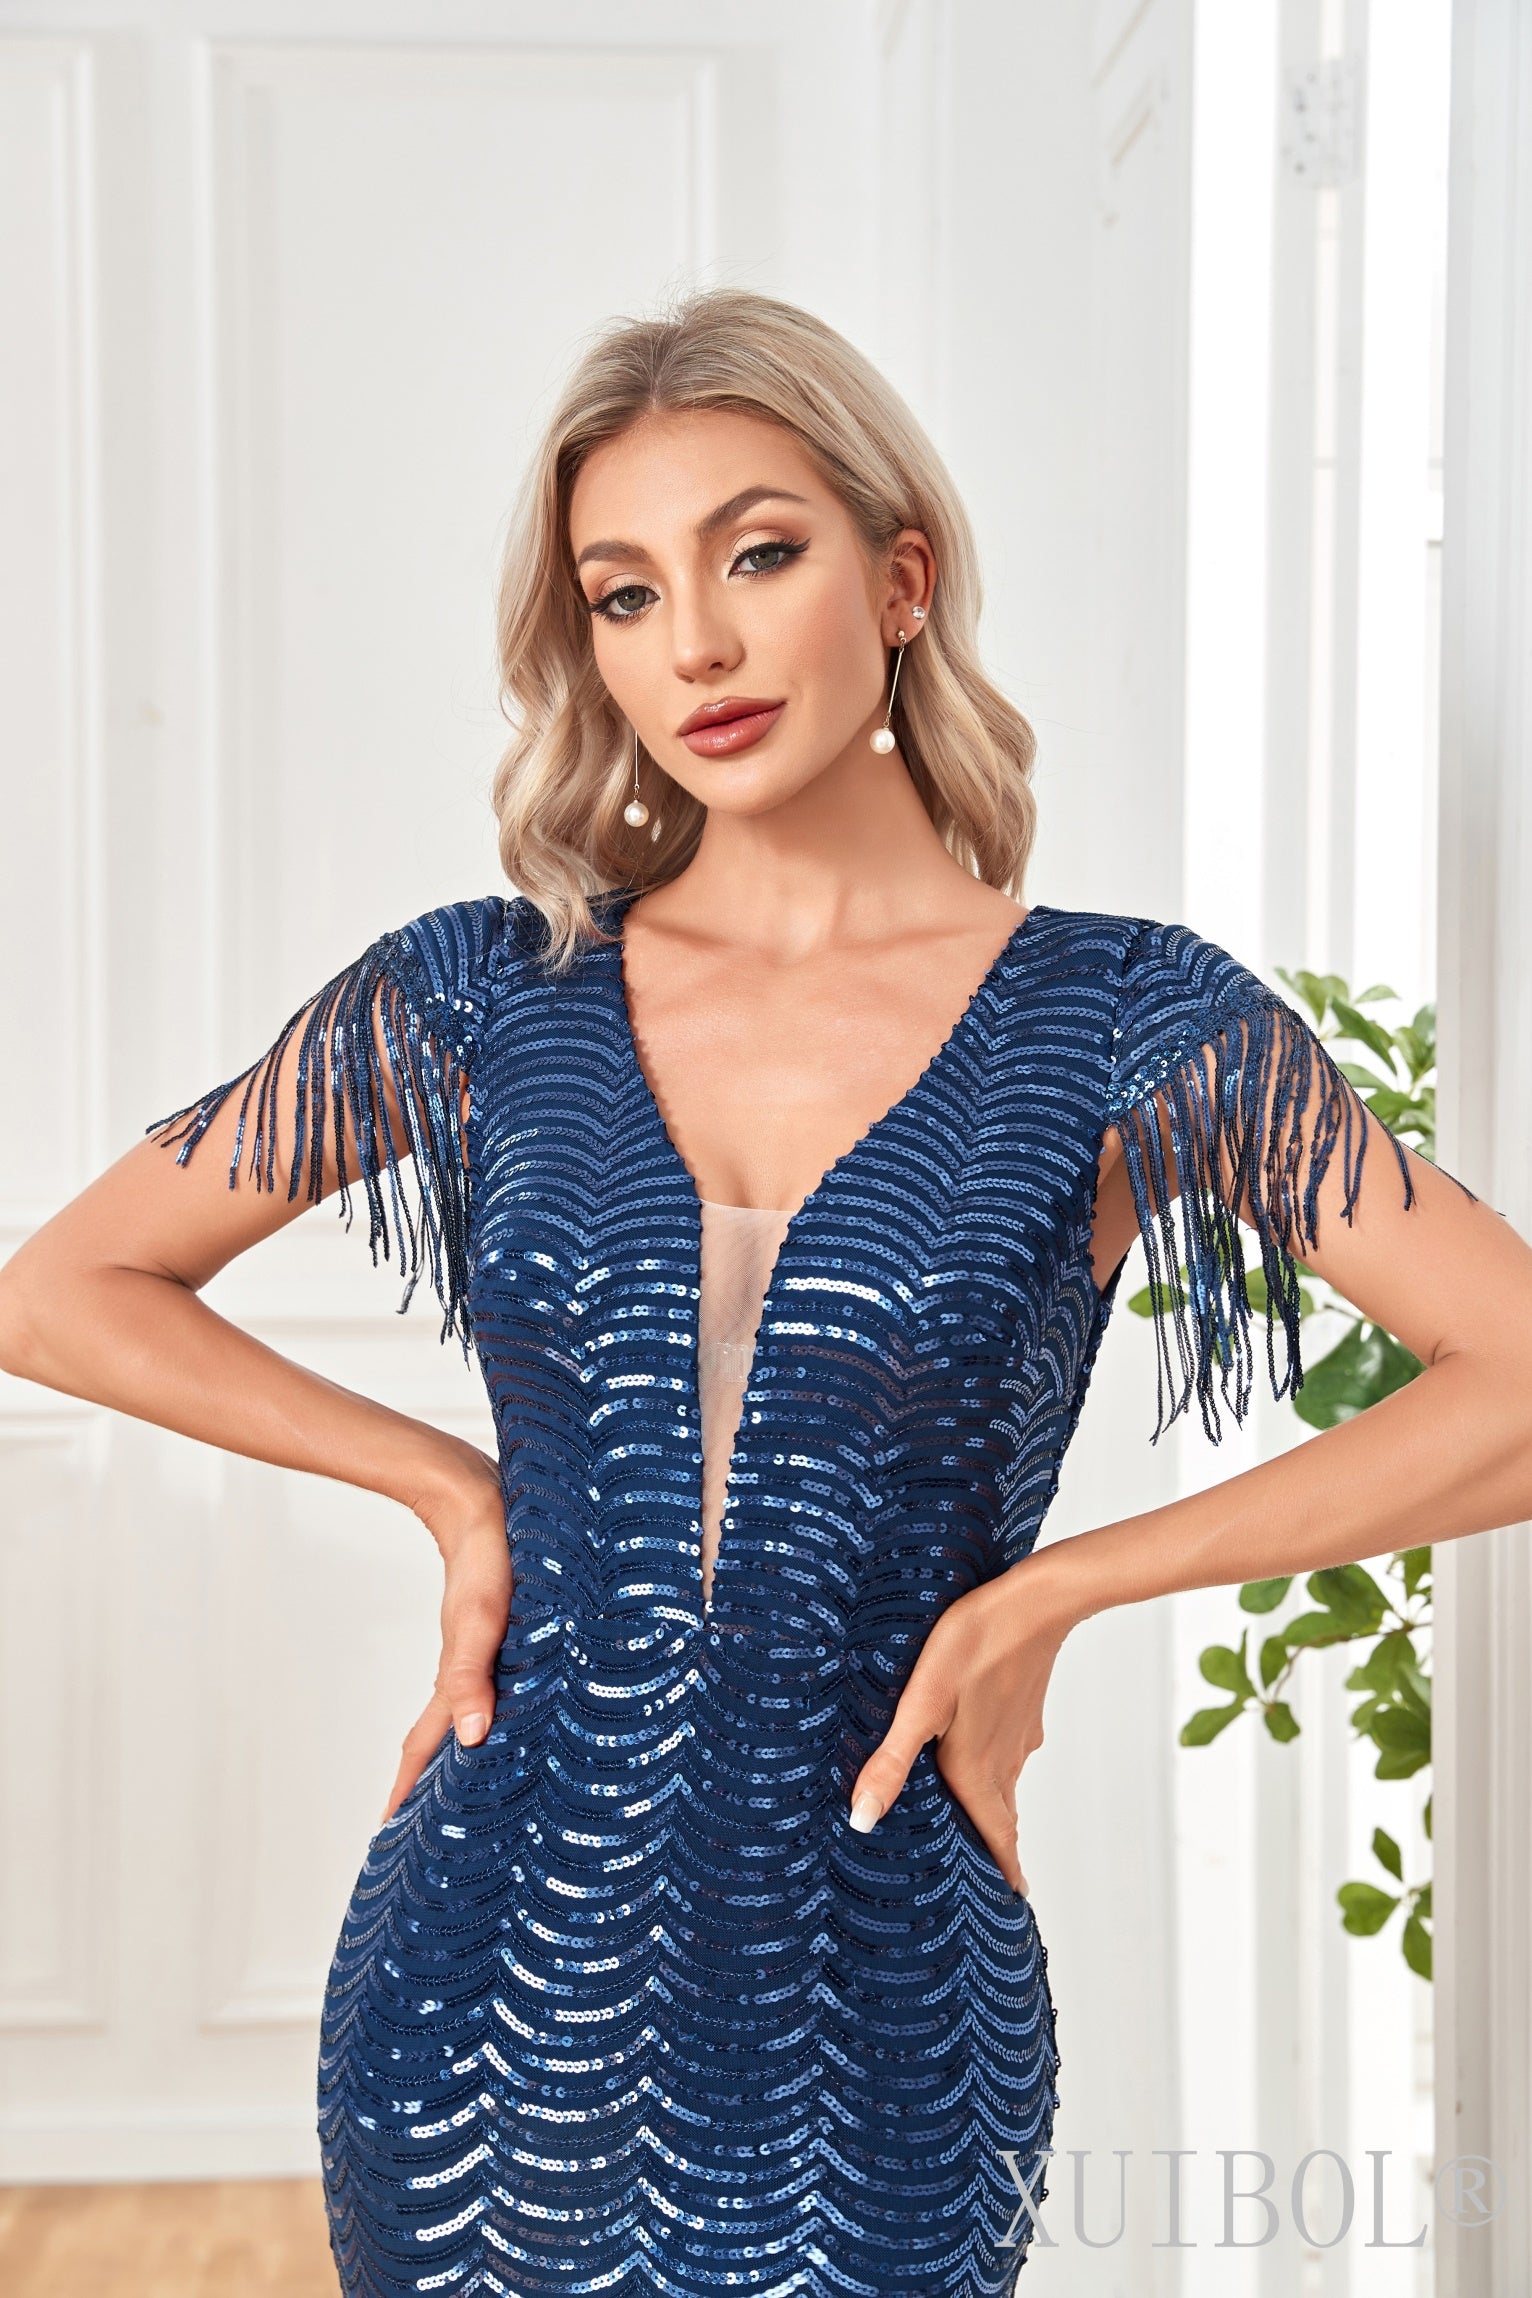 XUIBOL | Plunging_Sequin_and_Beaded_A line_Gown_Navy